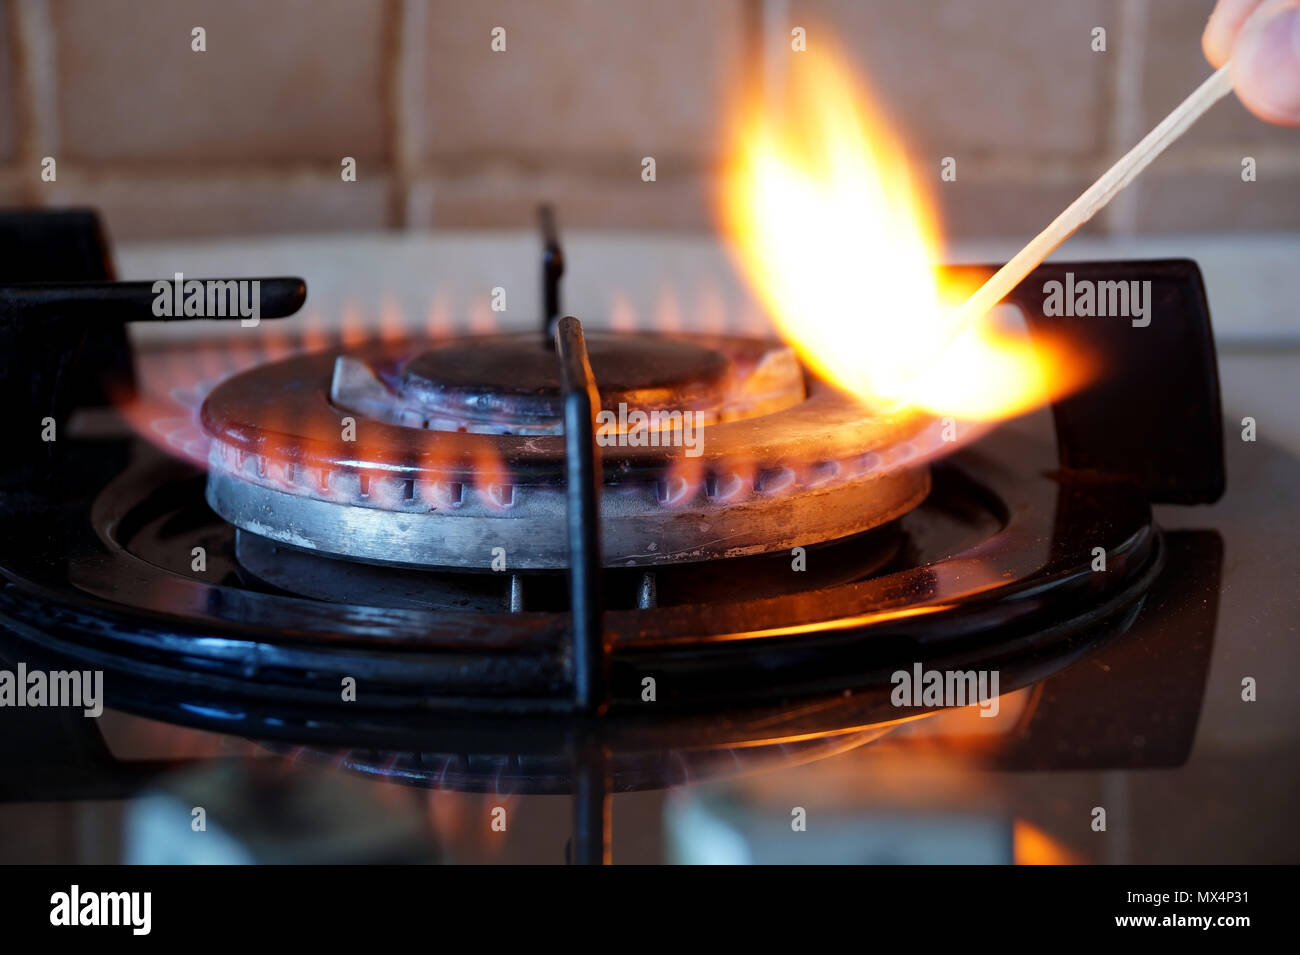 Ignition of a gas ring on the stove Stock Photo